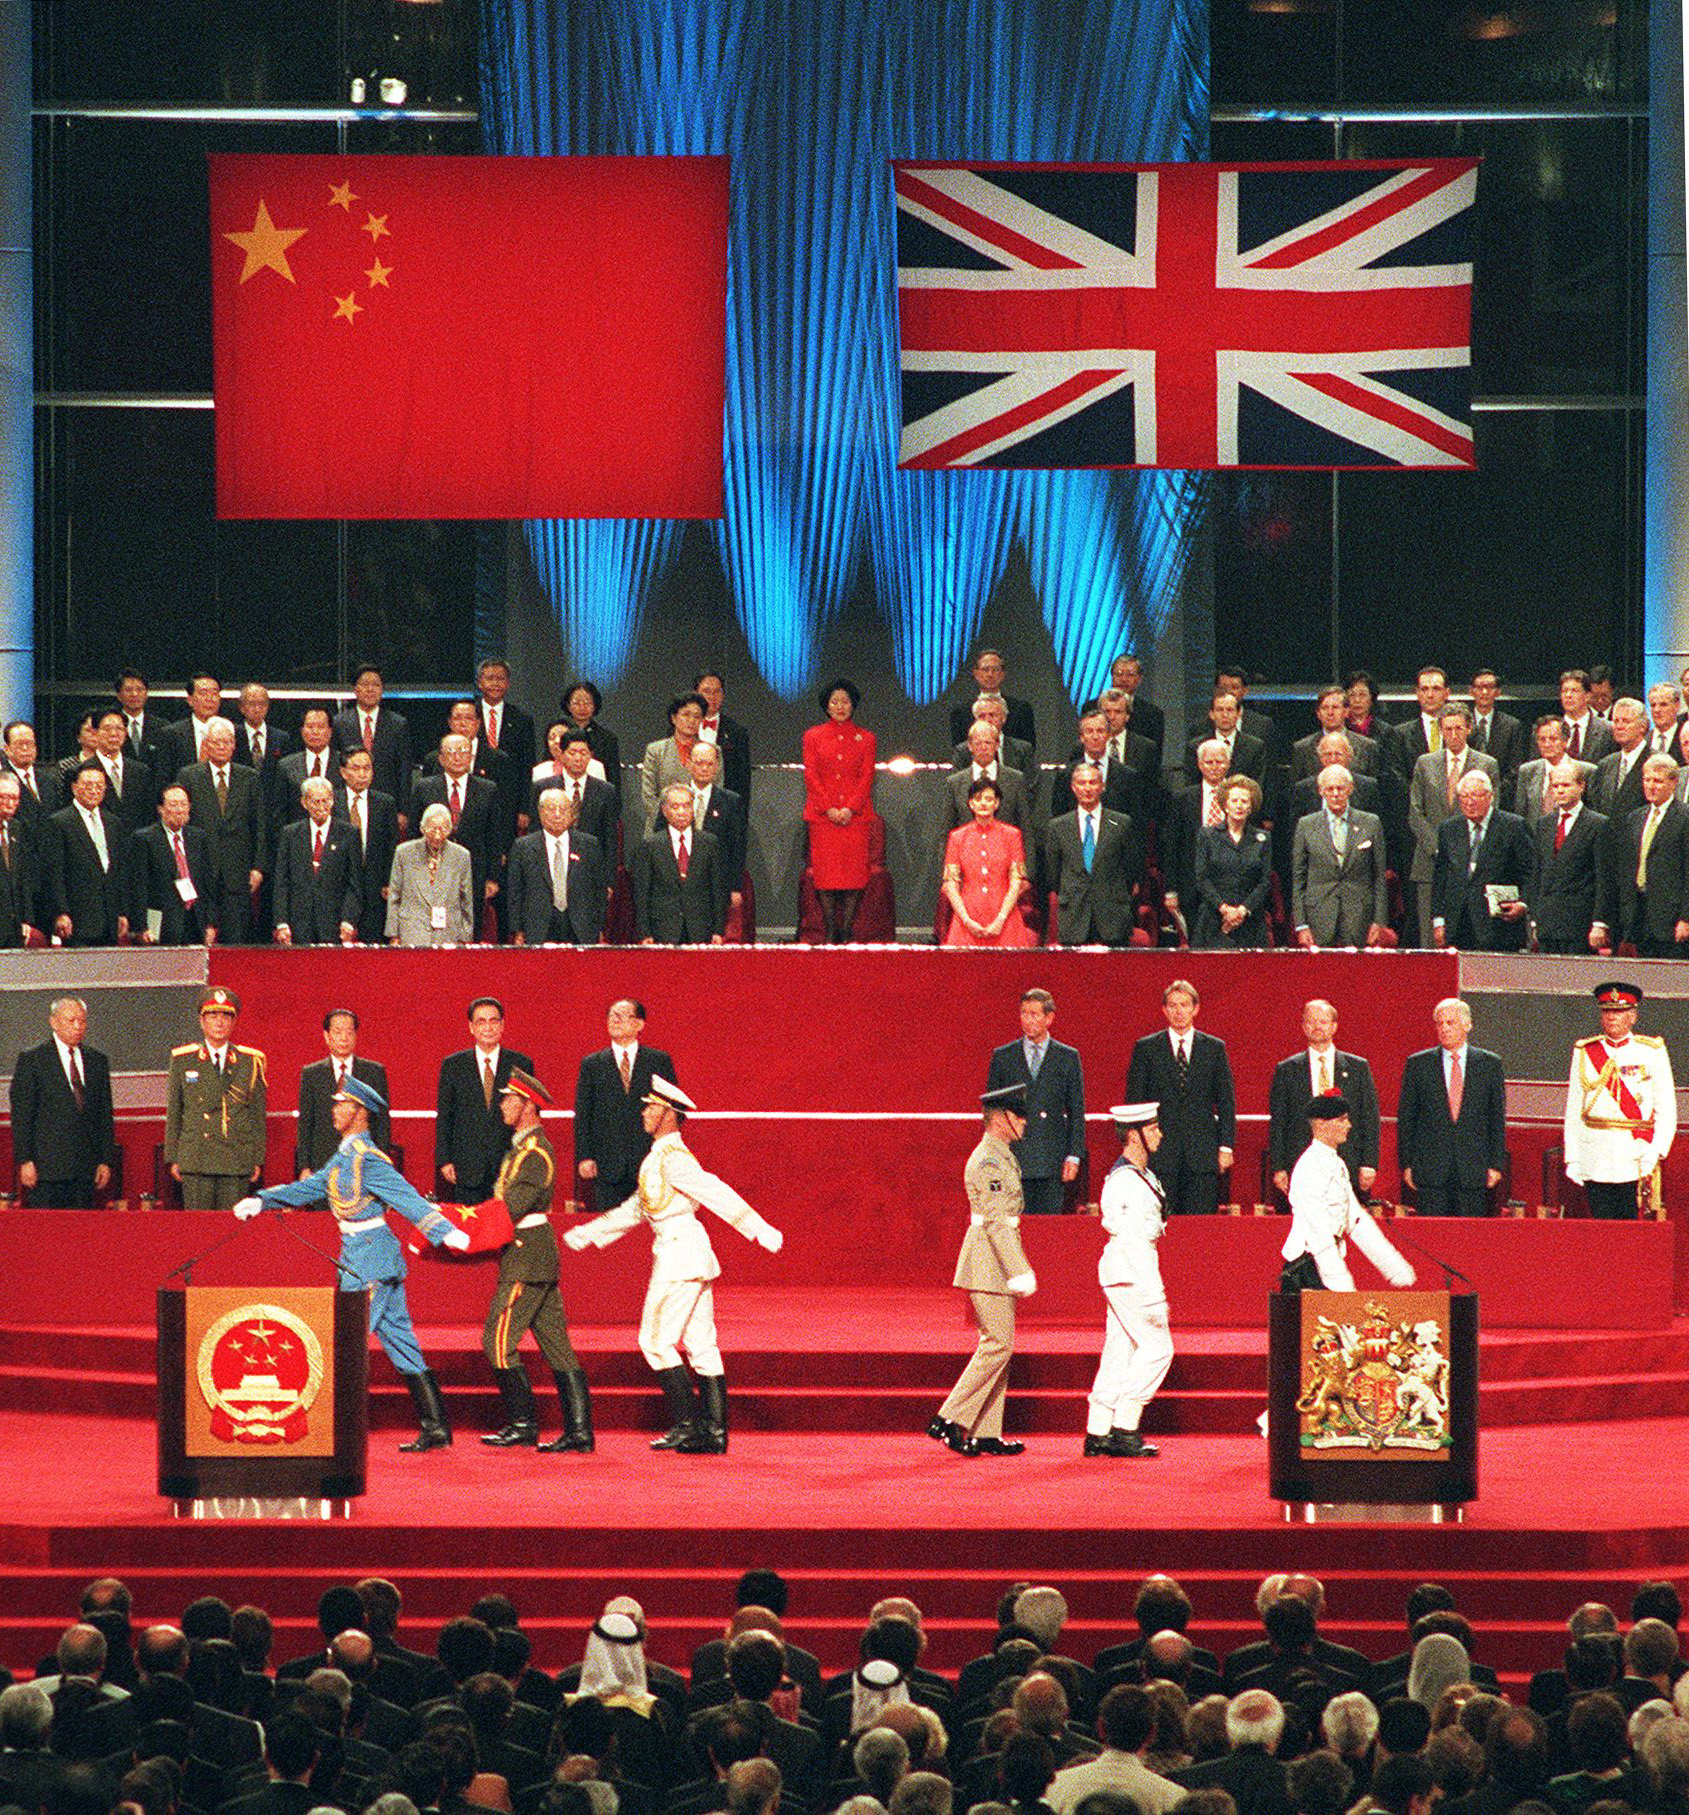 A Chinese soldier holds the national flag prior to its raising as the British military march, at right, during the handover ceremony at the Hong Kong Convention and Exhibition Centre on July 1, 1997. The event marks the end of 156 years of British colonial rule over the territory.